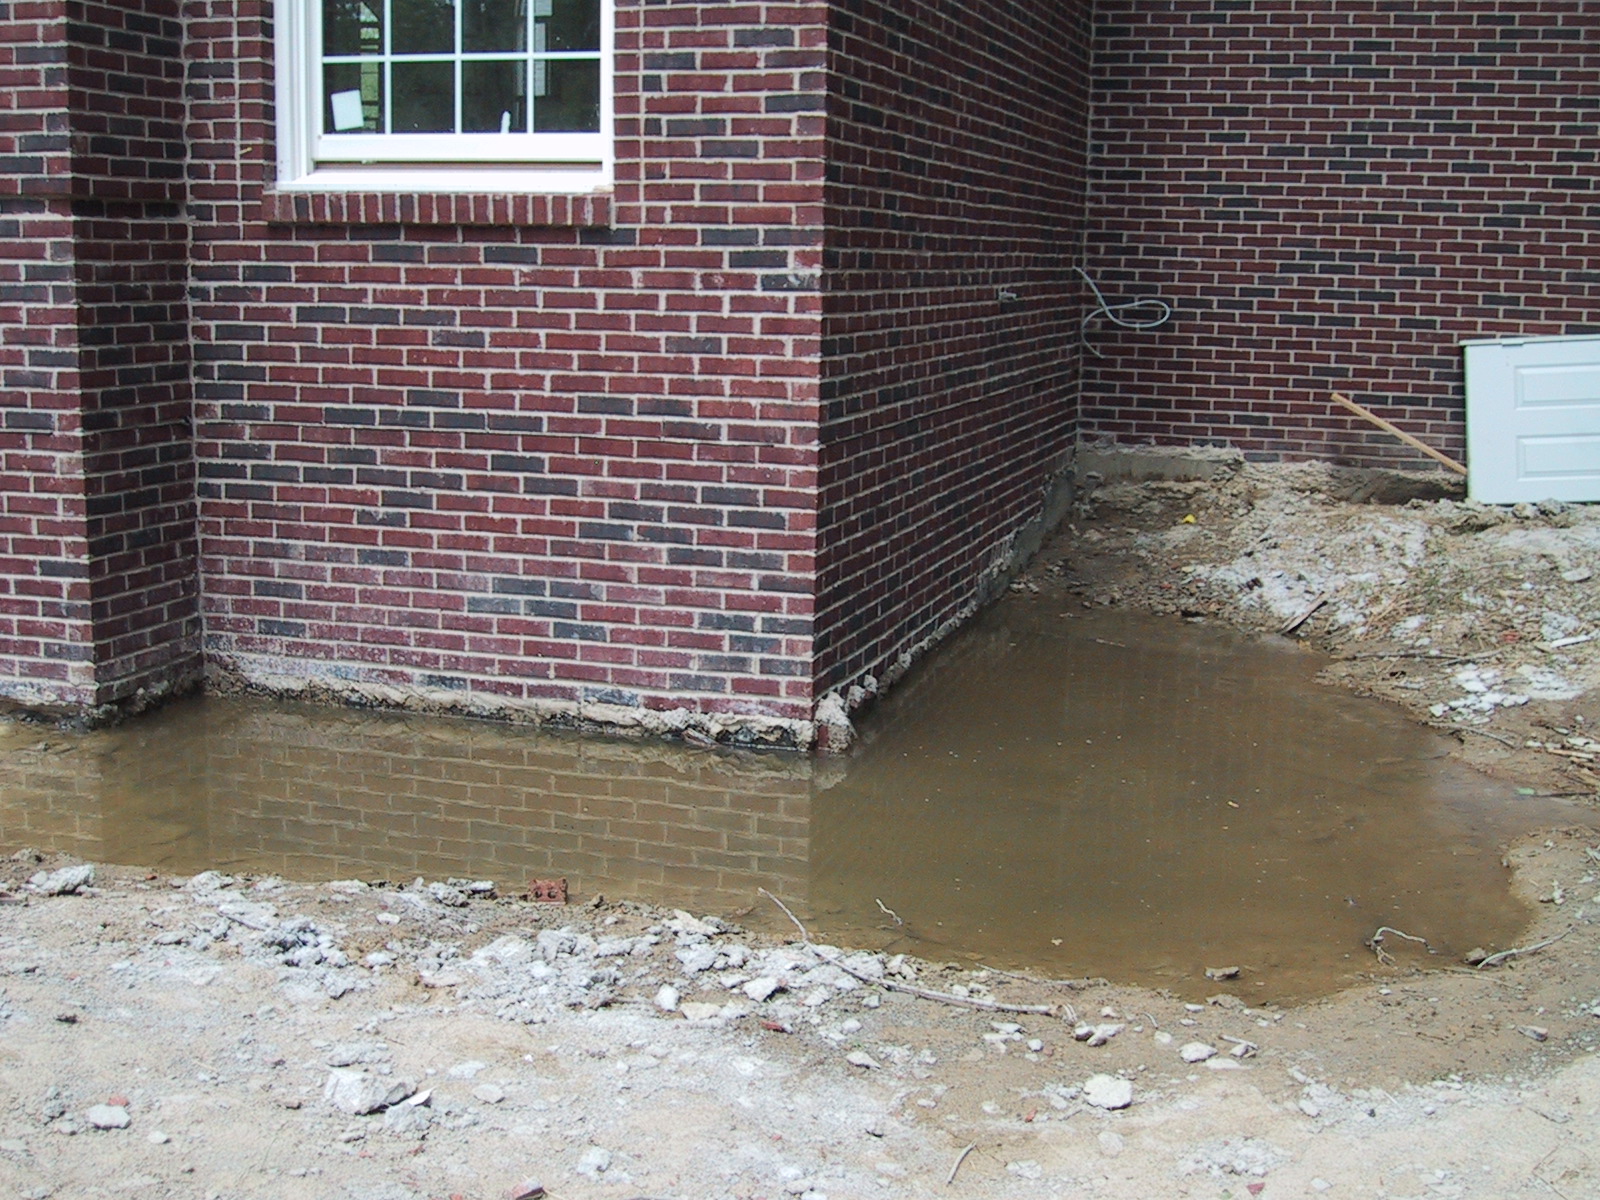 Water pooling at the foundation of a brick school building.